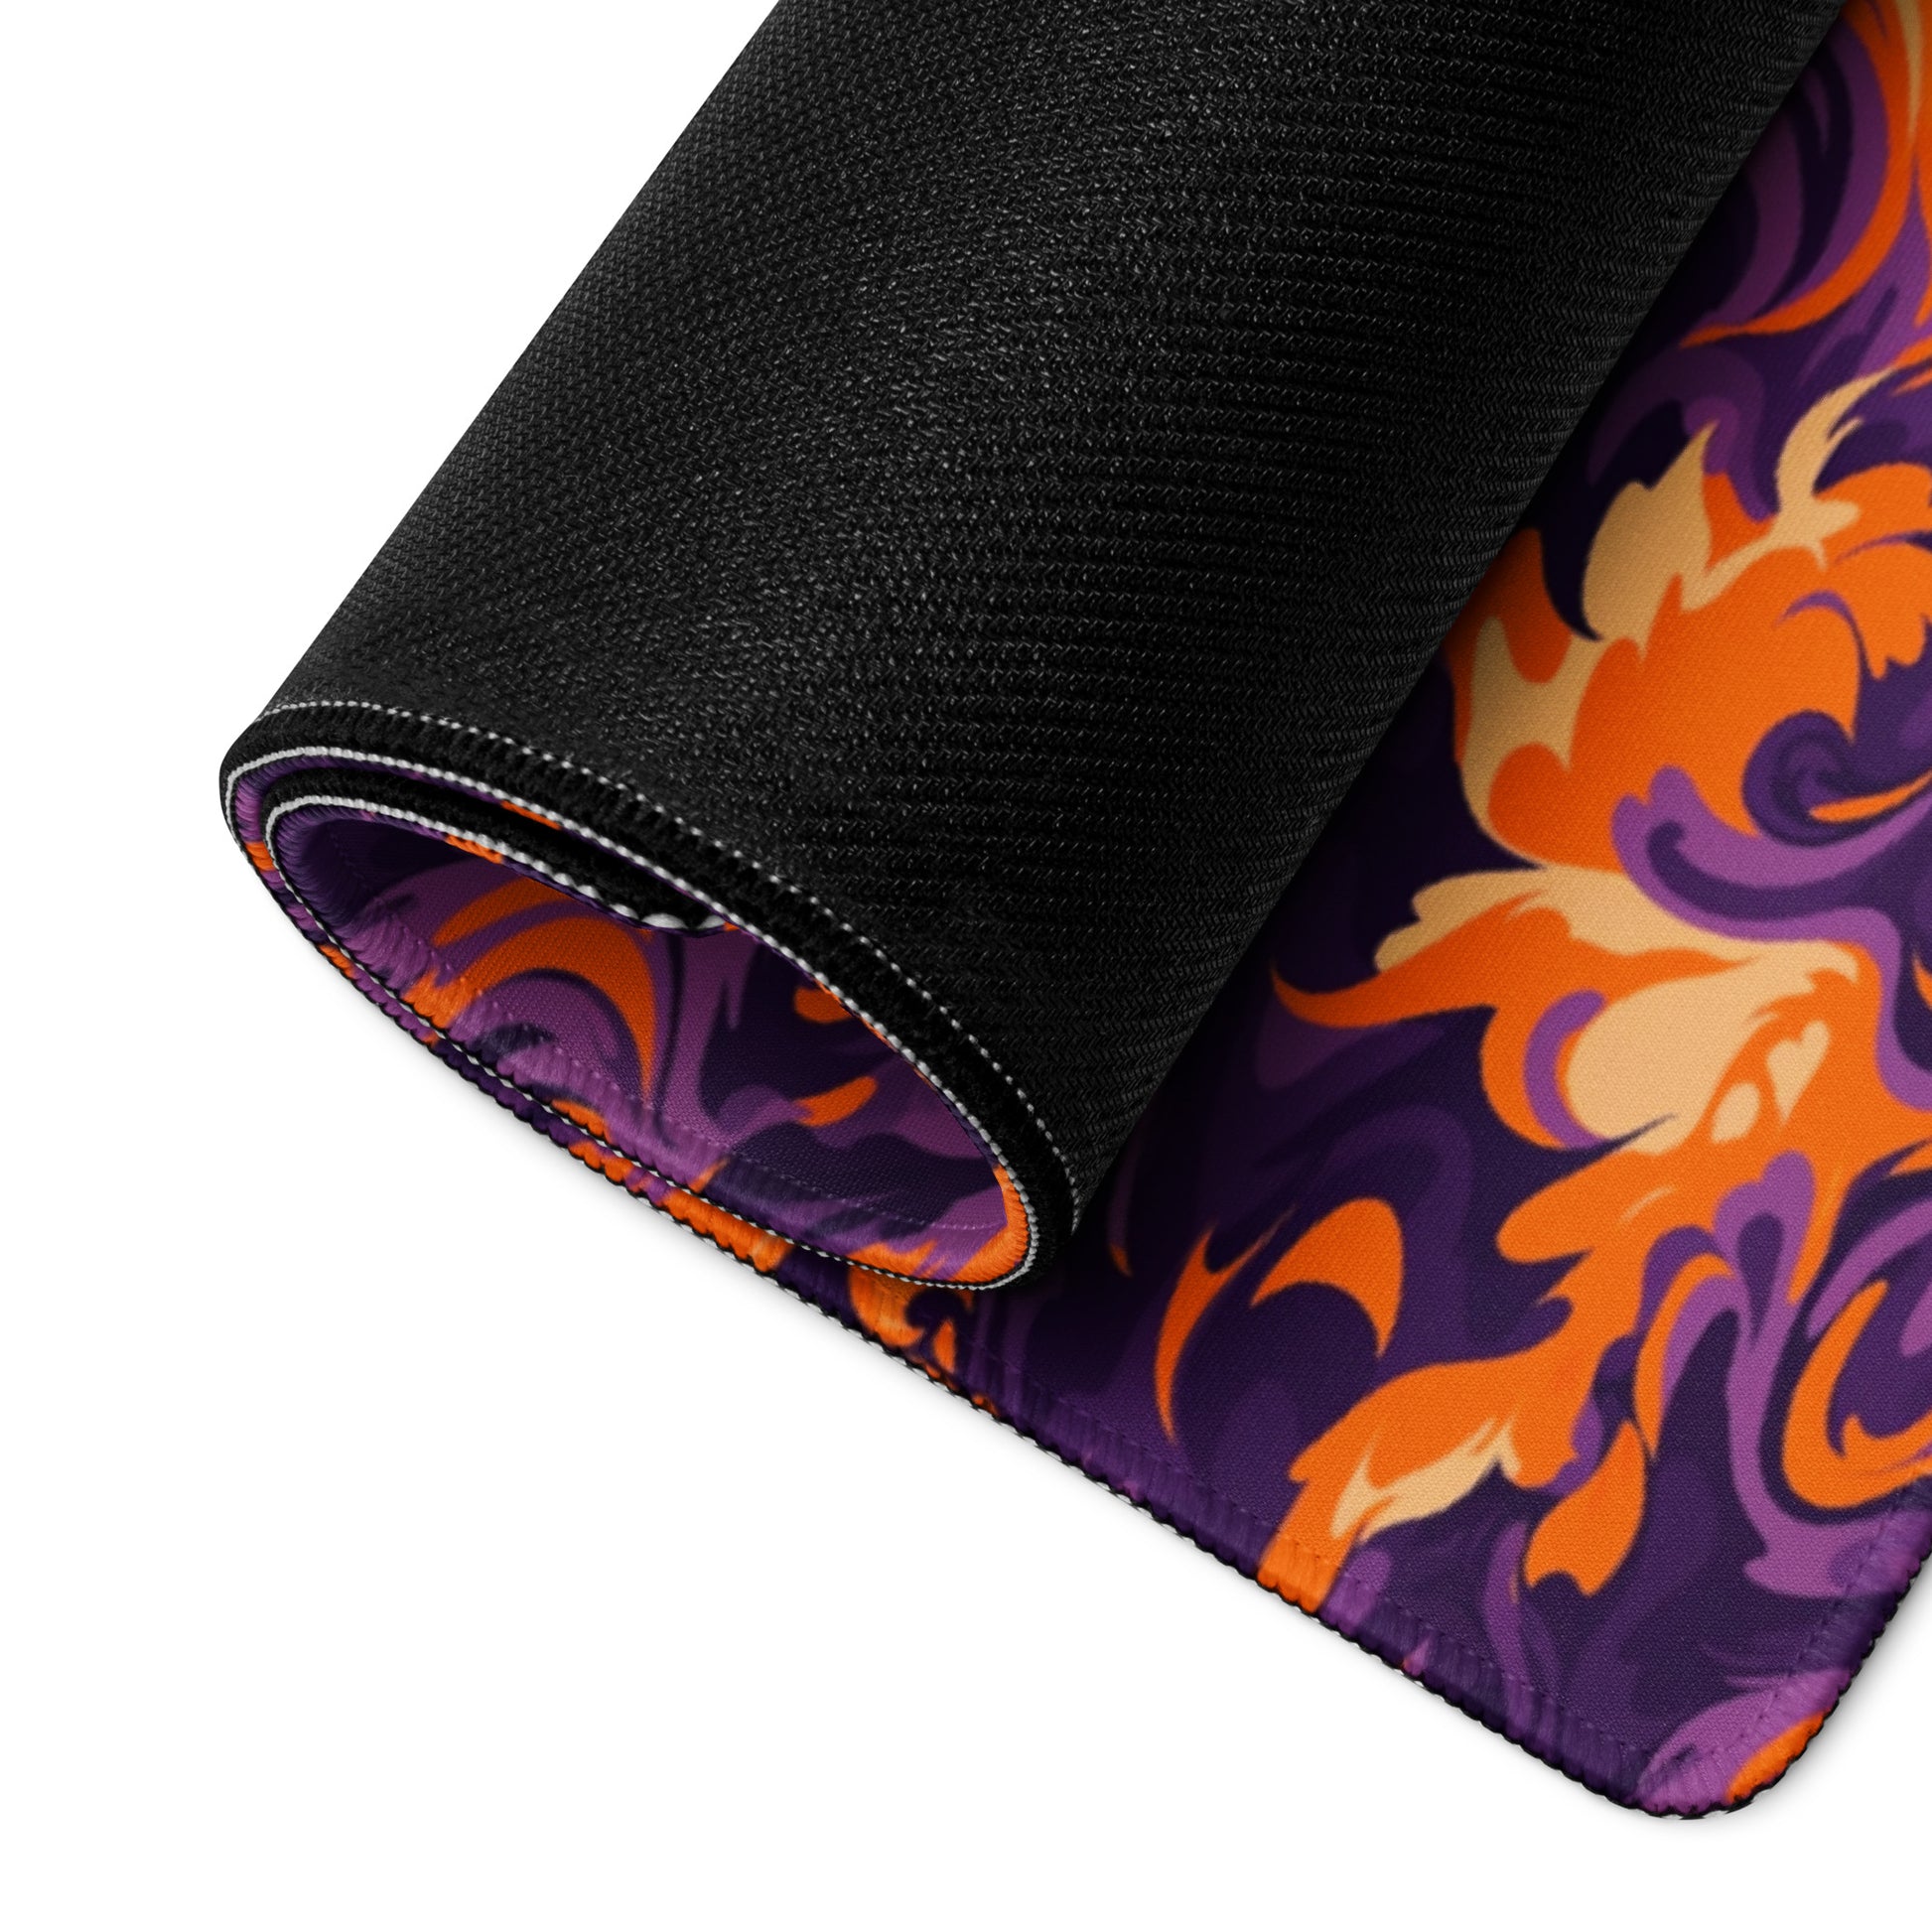 A 36" x 18" desk pad with a purple and orange camo pattern rolled up.